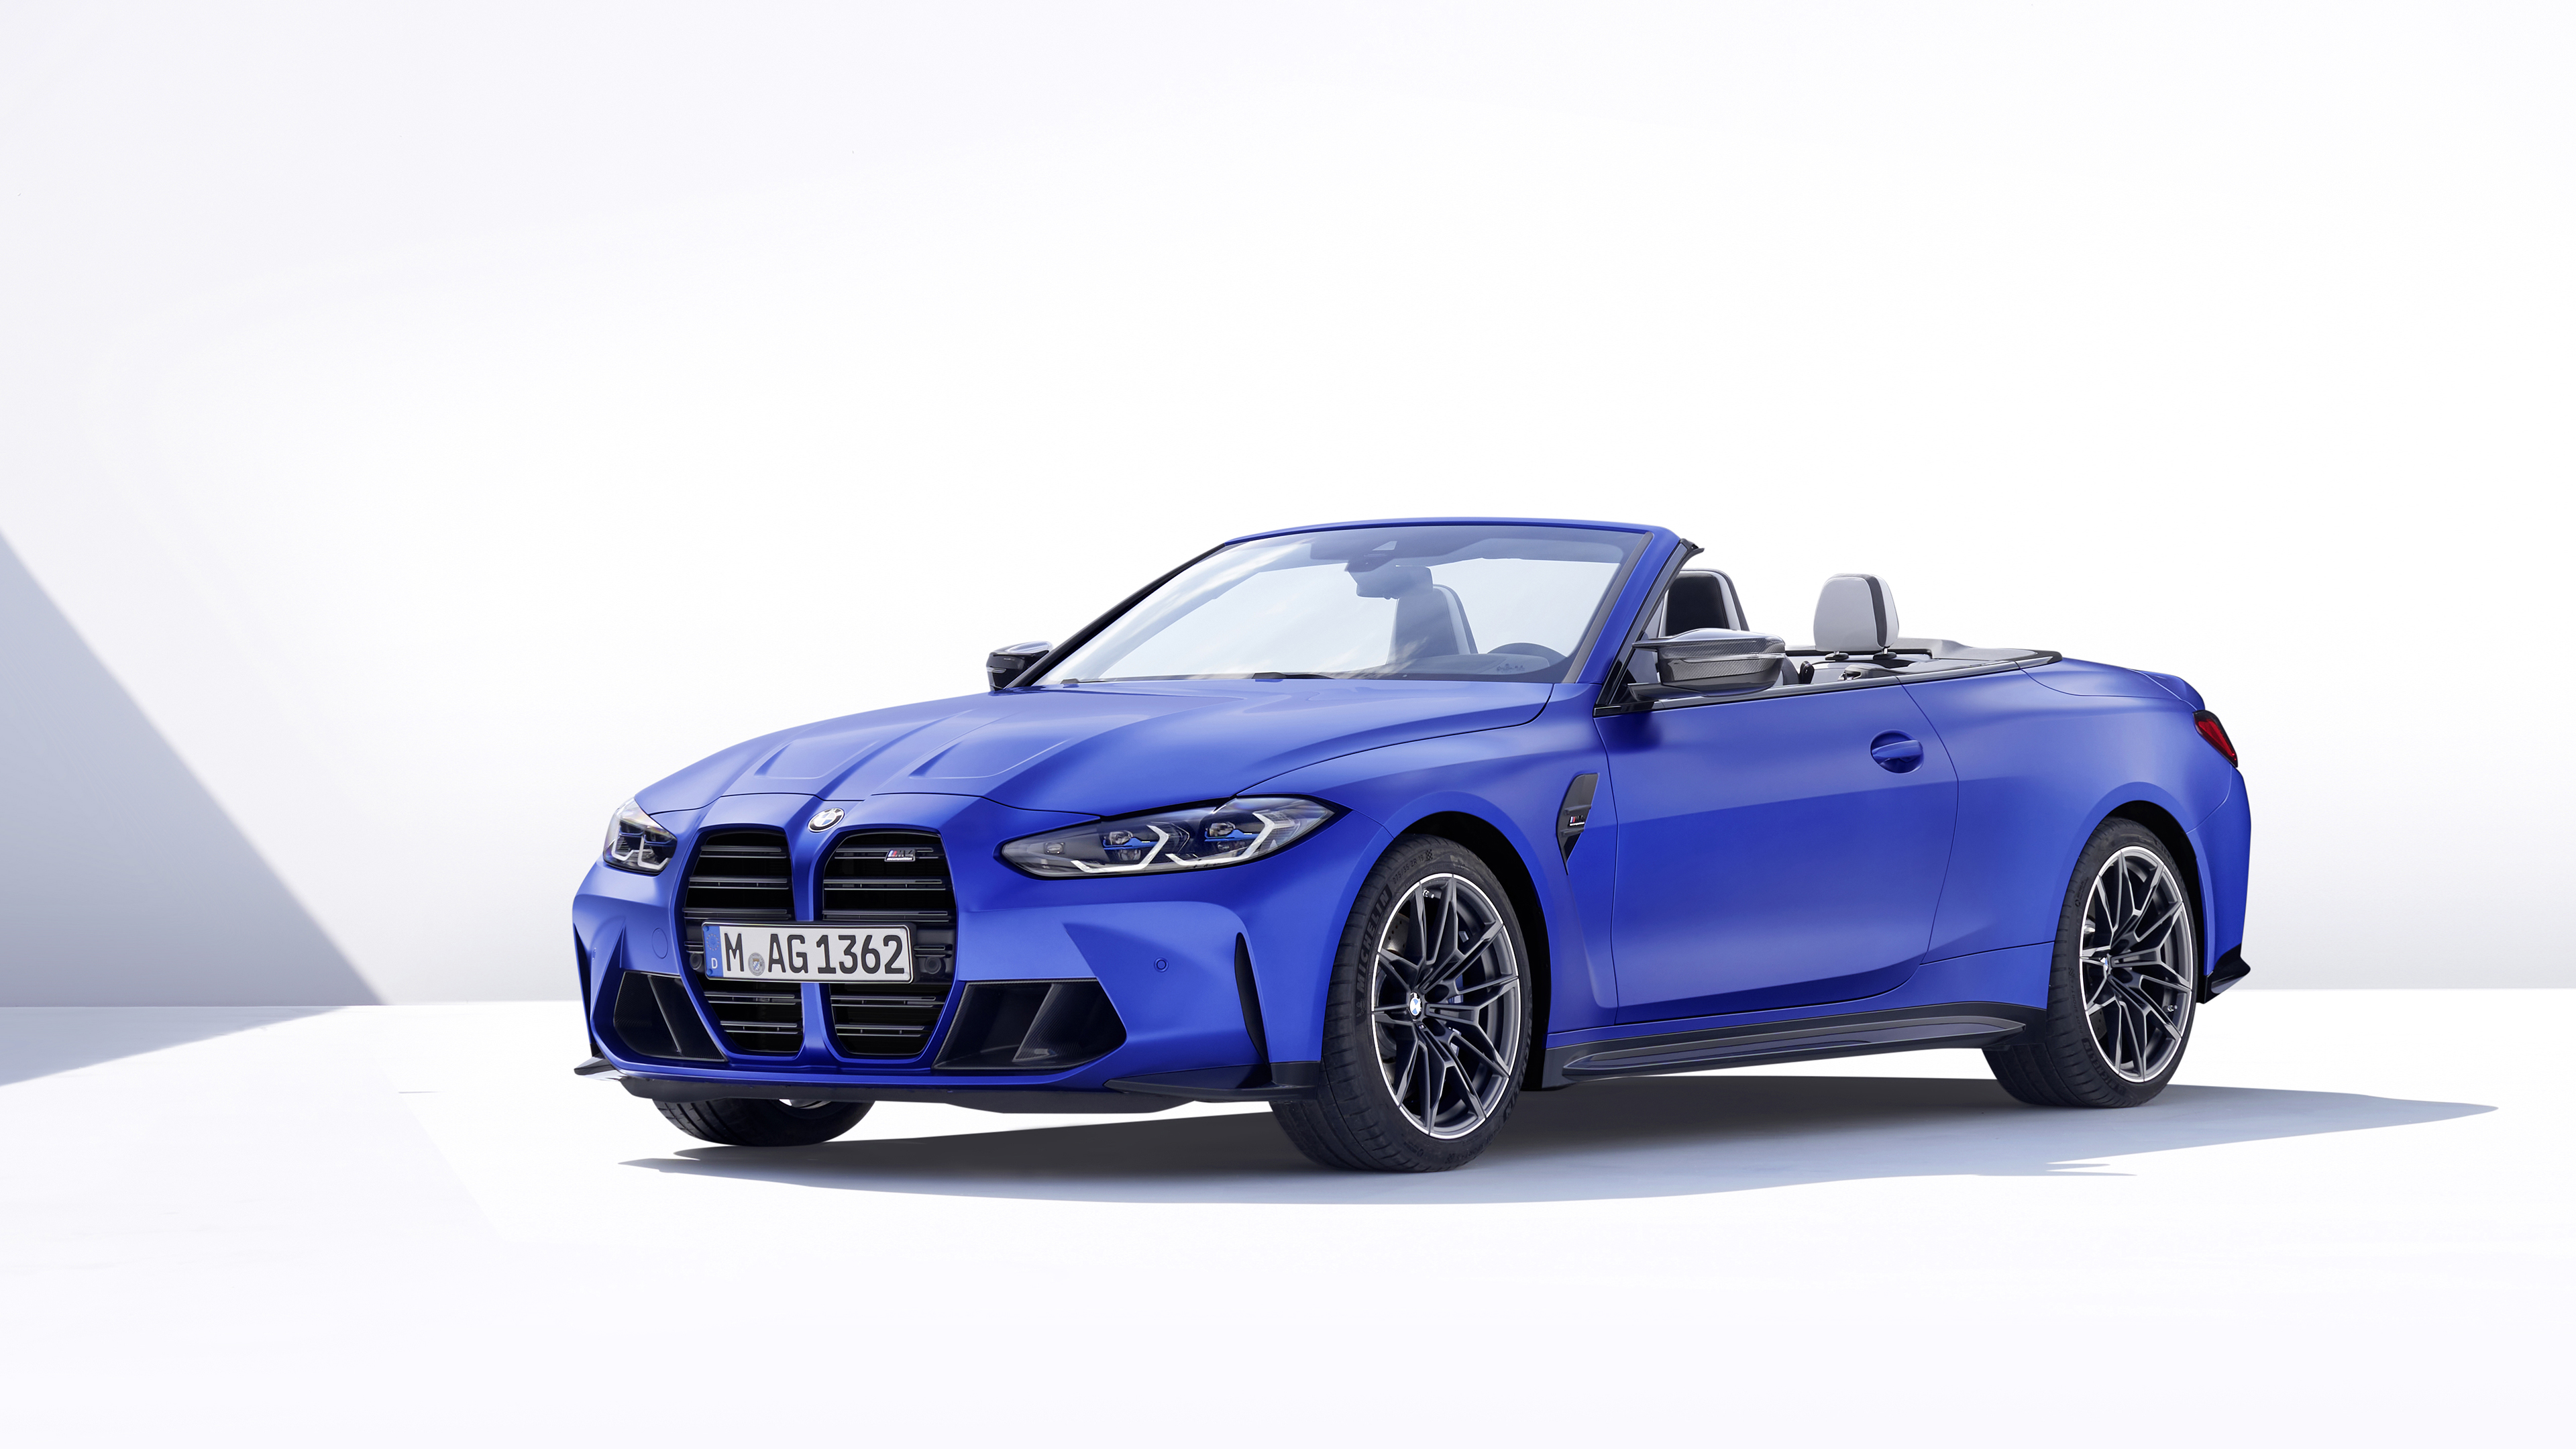 General 3840x2160 BMW BMW M4 convertible cabriolet blue cars sports car simple background German cars